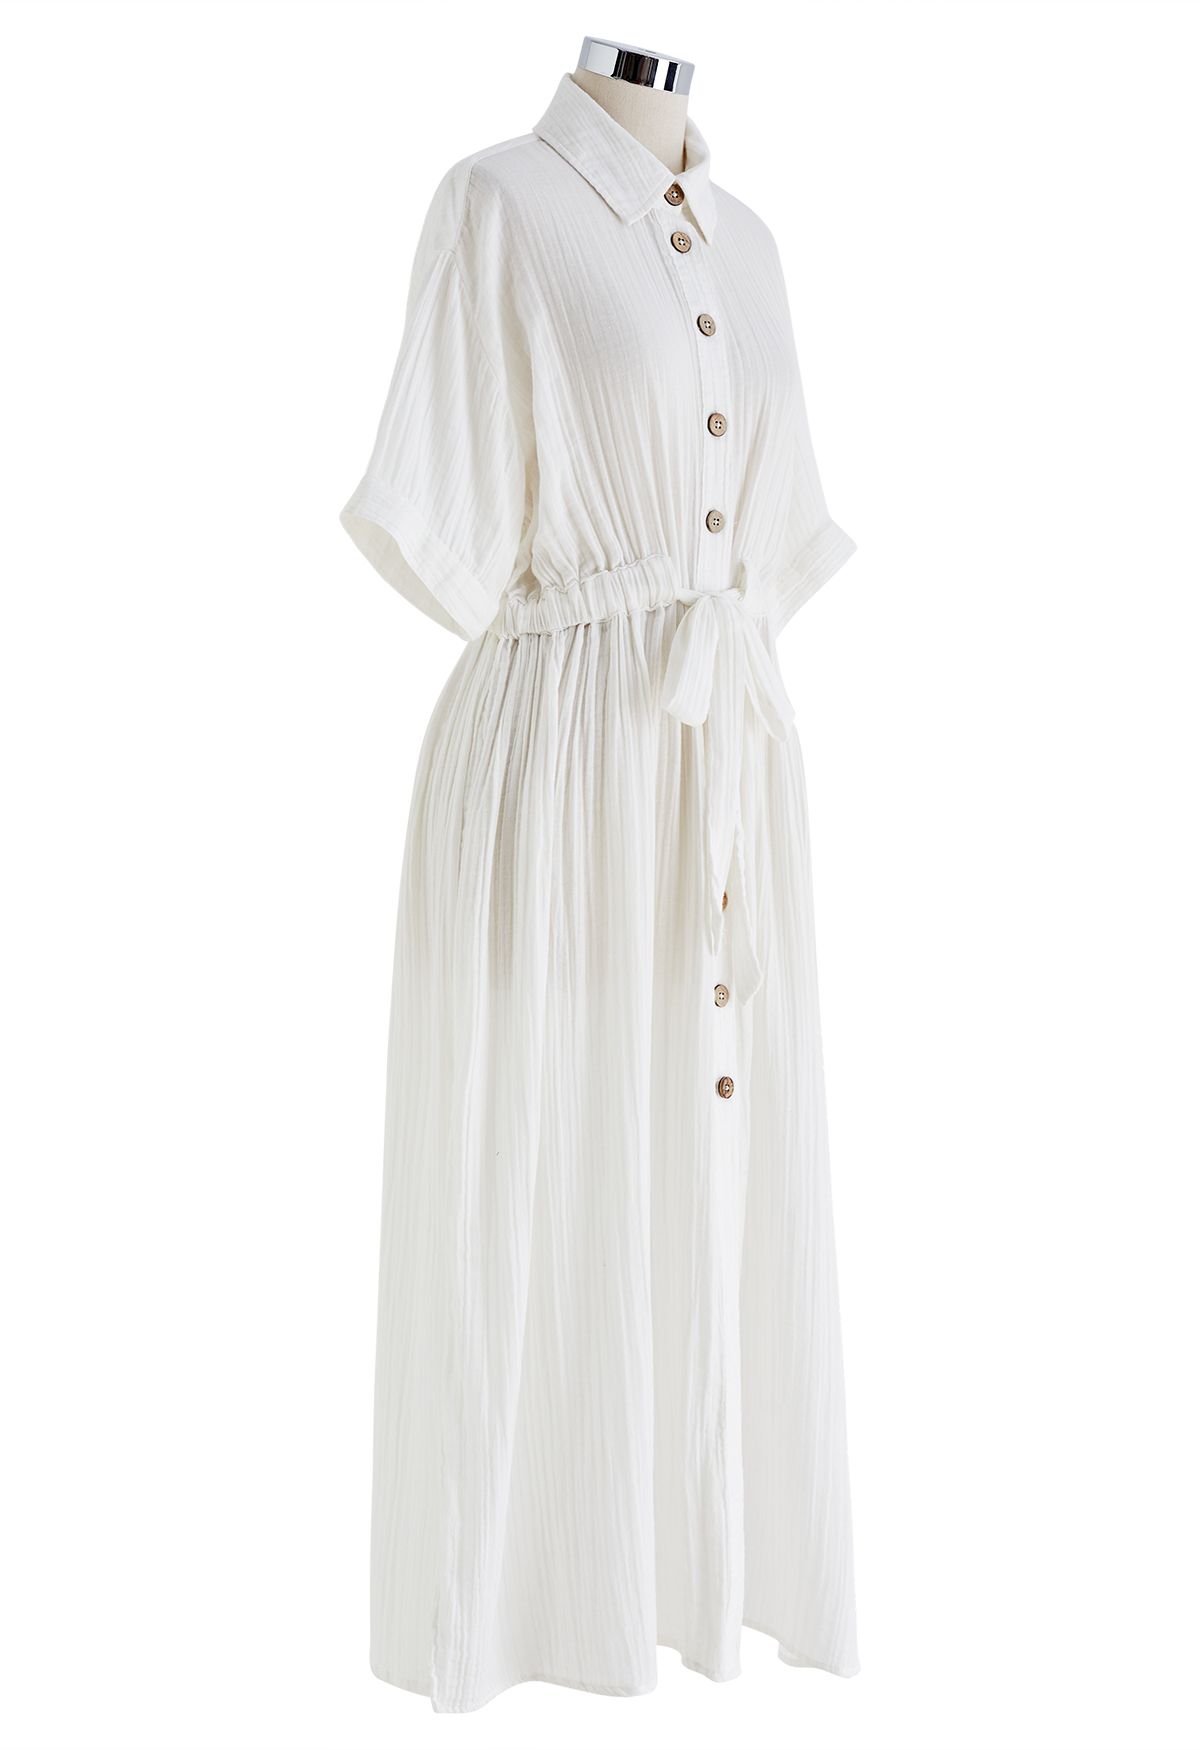 Sunshine Fun Time Button Front Shirt Dress in Ivory